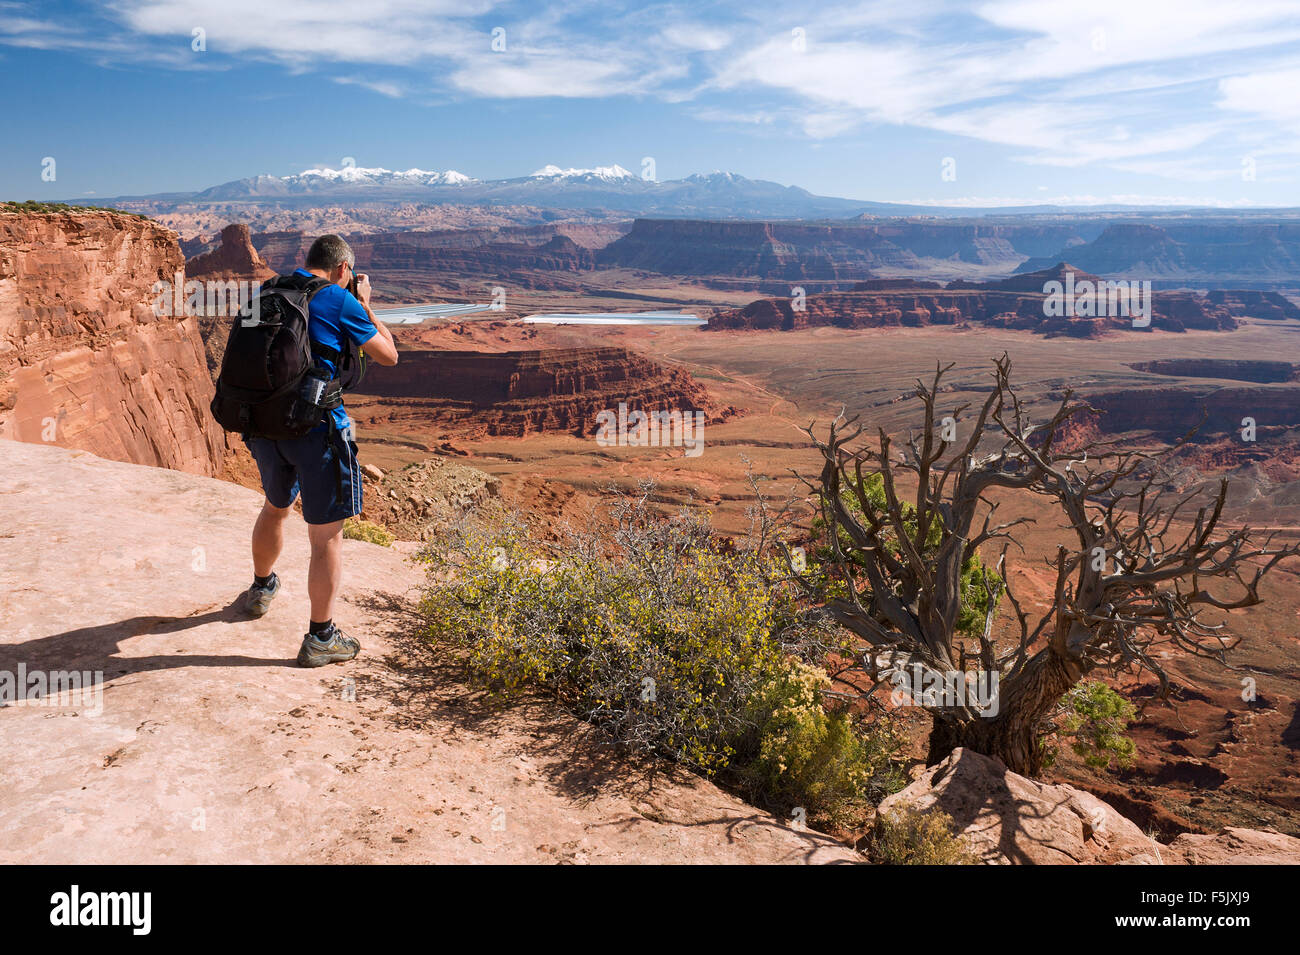 Hiker taking a picture from an overlook at Dead Horse Point State Park, Utah, USA. Stock Photo